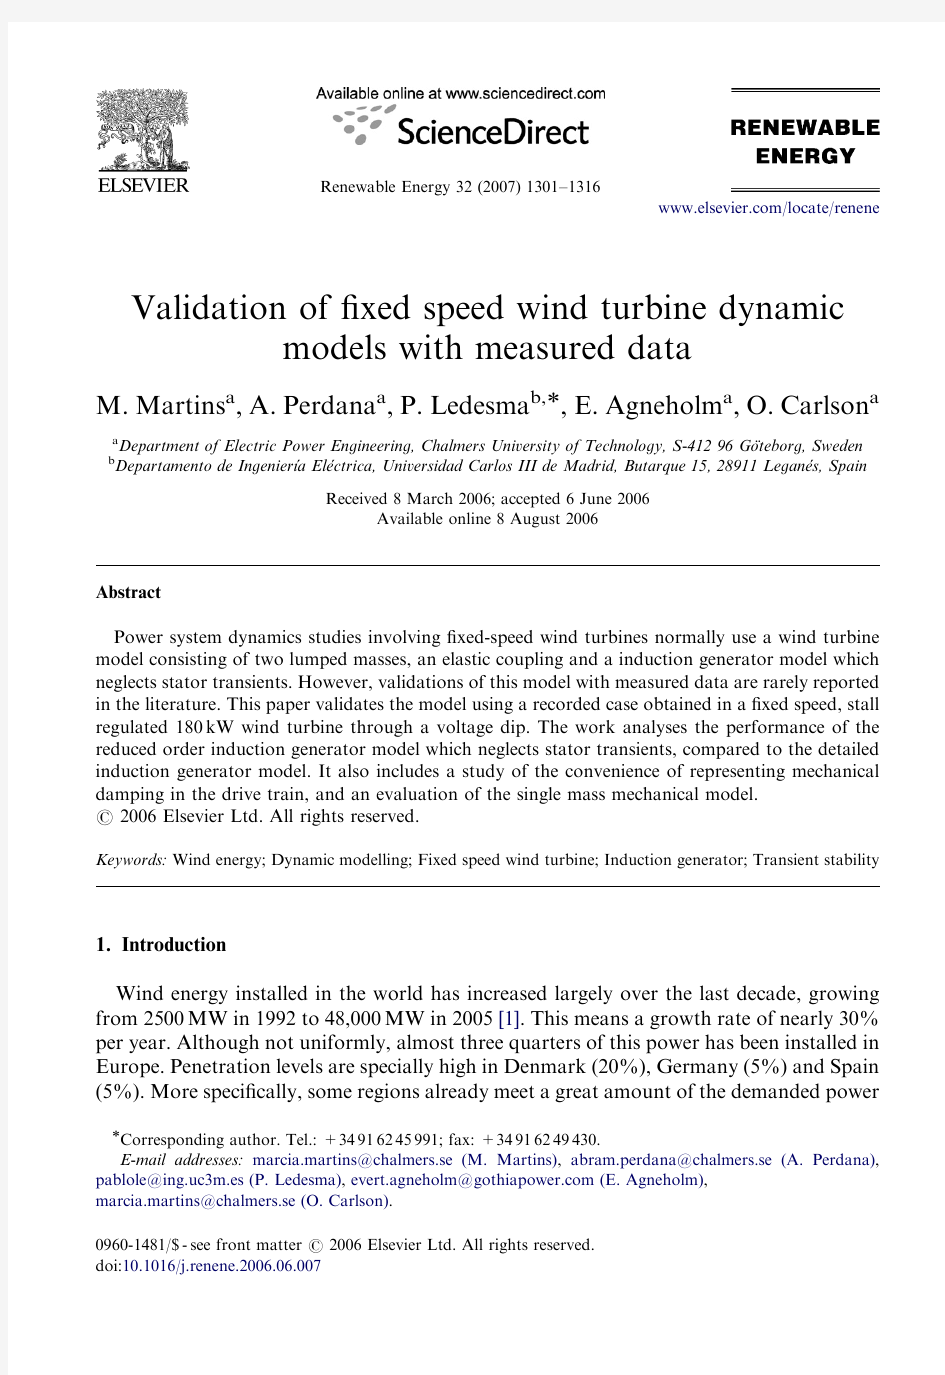 Validation of fixed speed wind turbine dynamic models with measured data